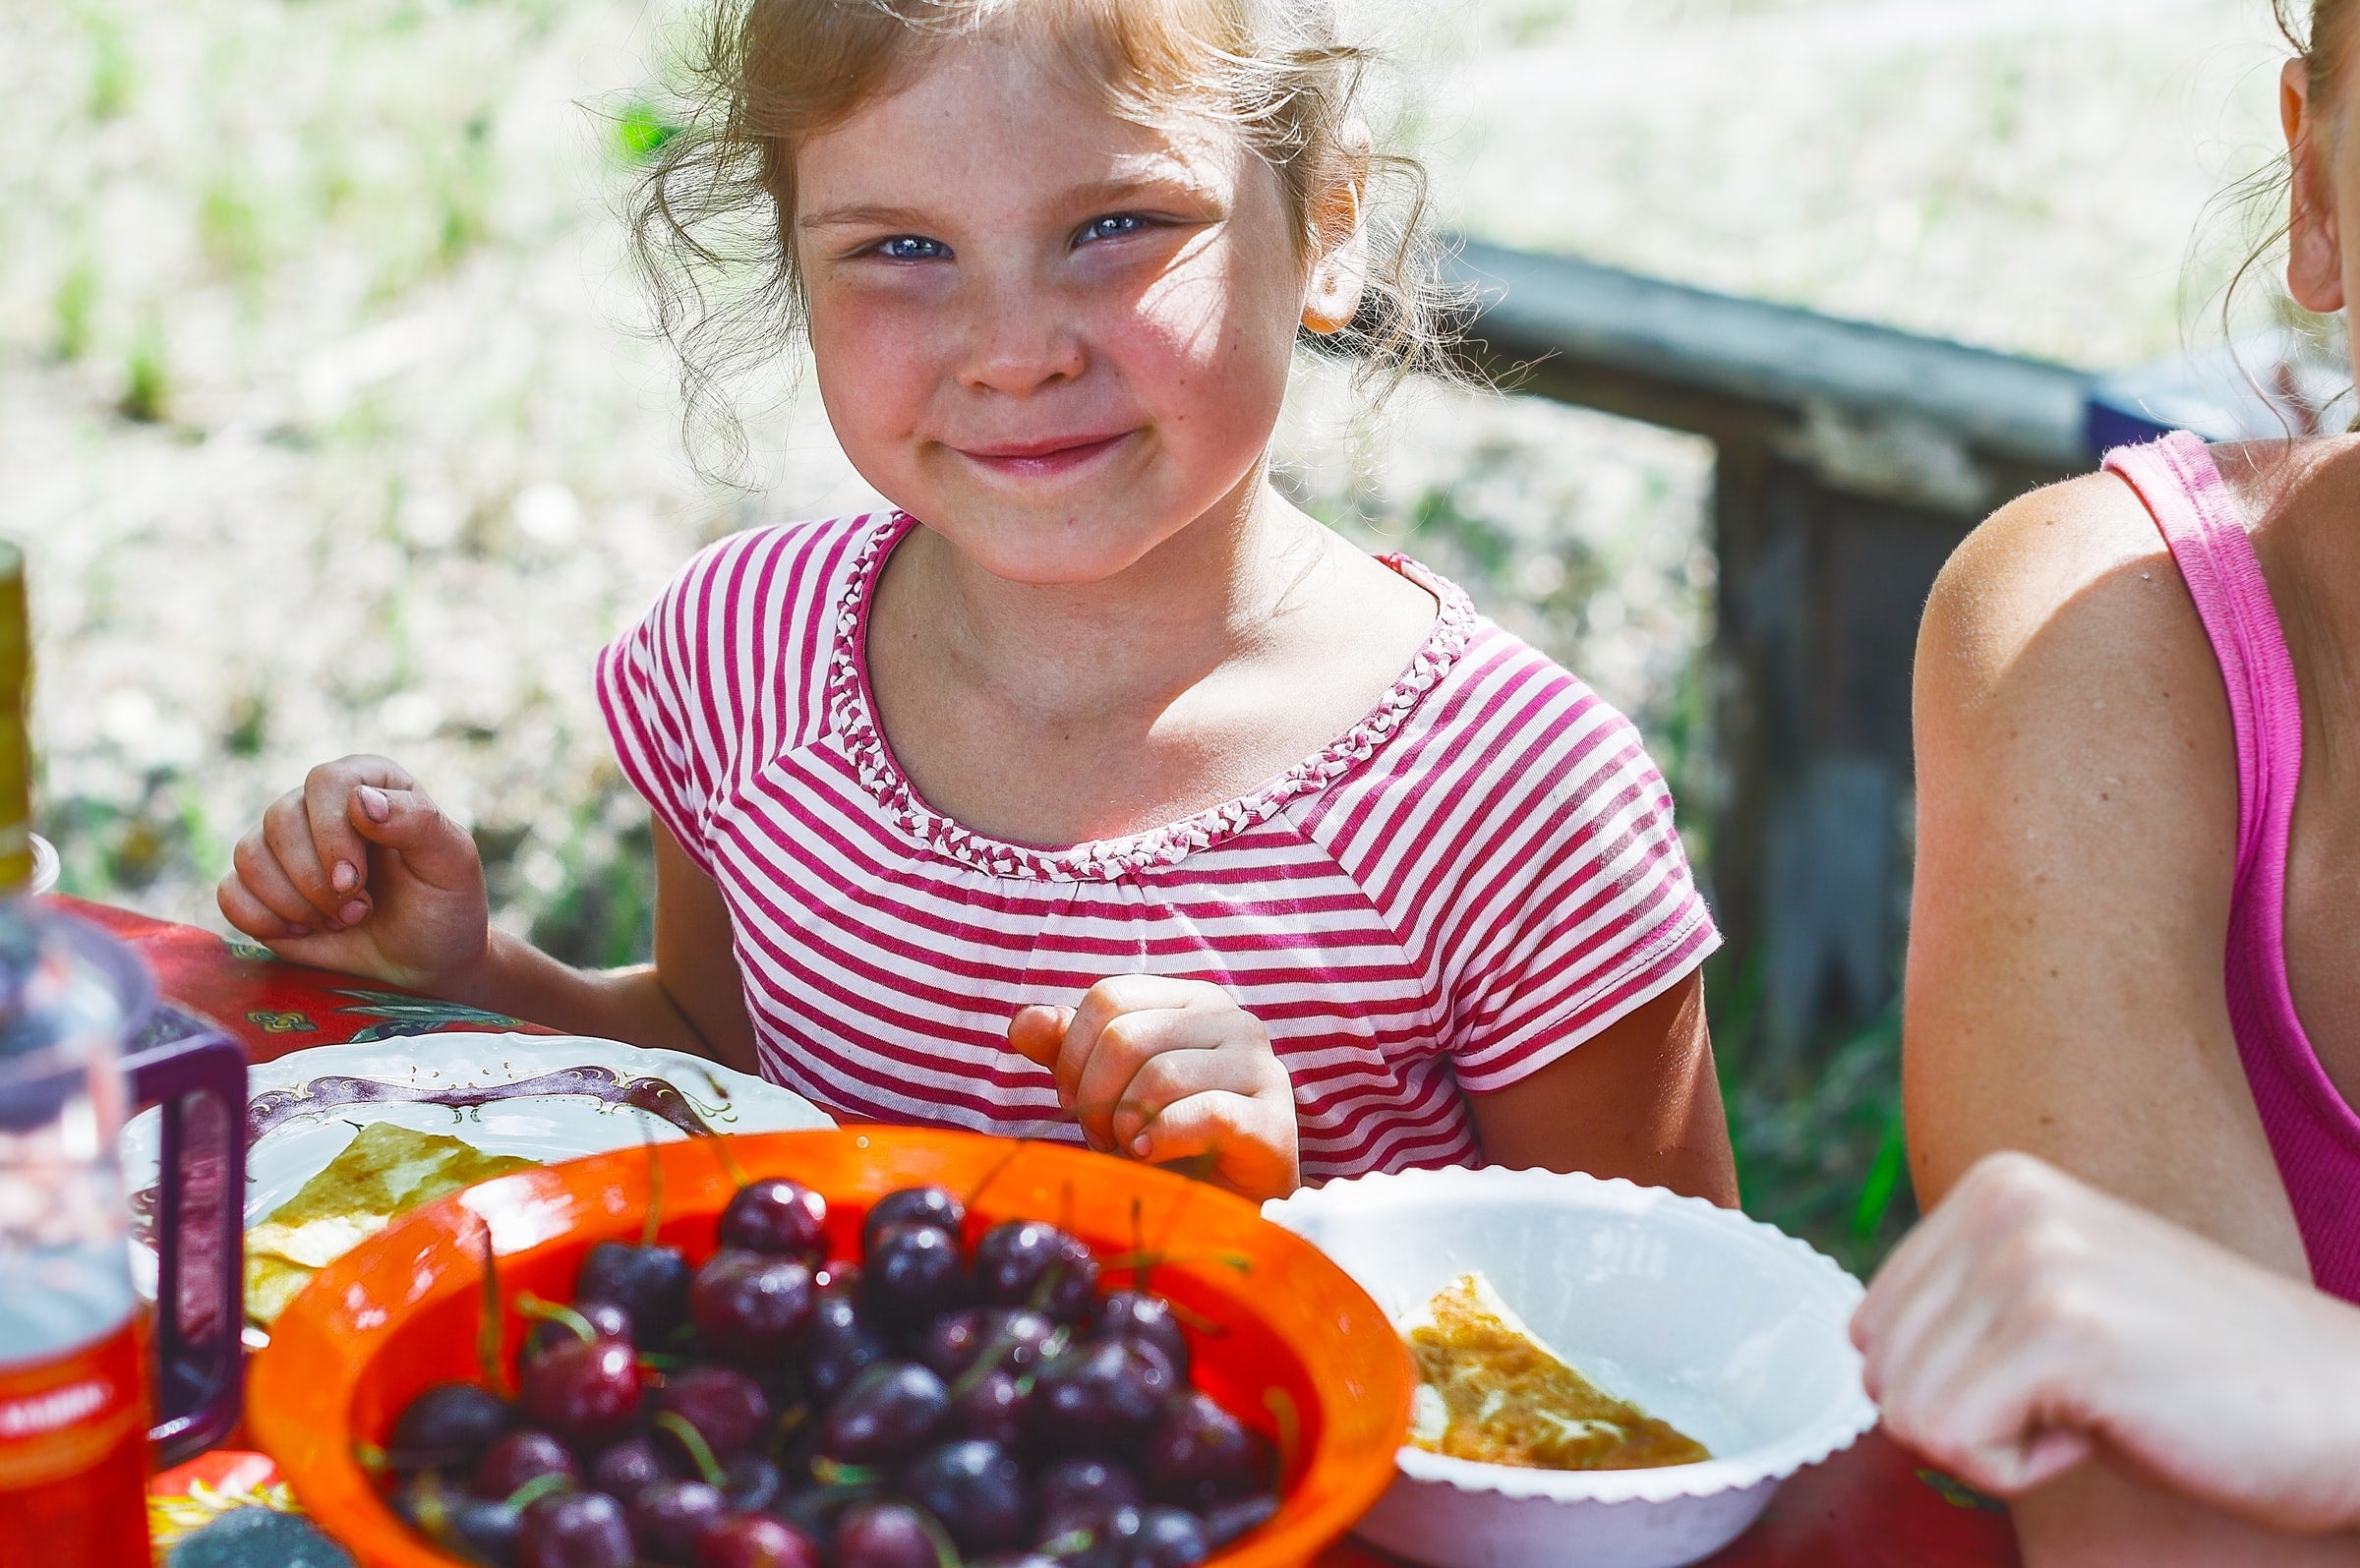 Smiling girl at picnic table with bowl of grapes in front of her